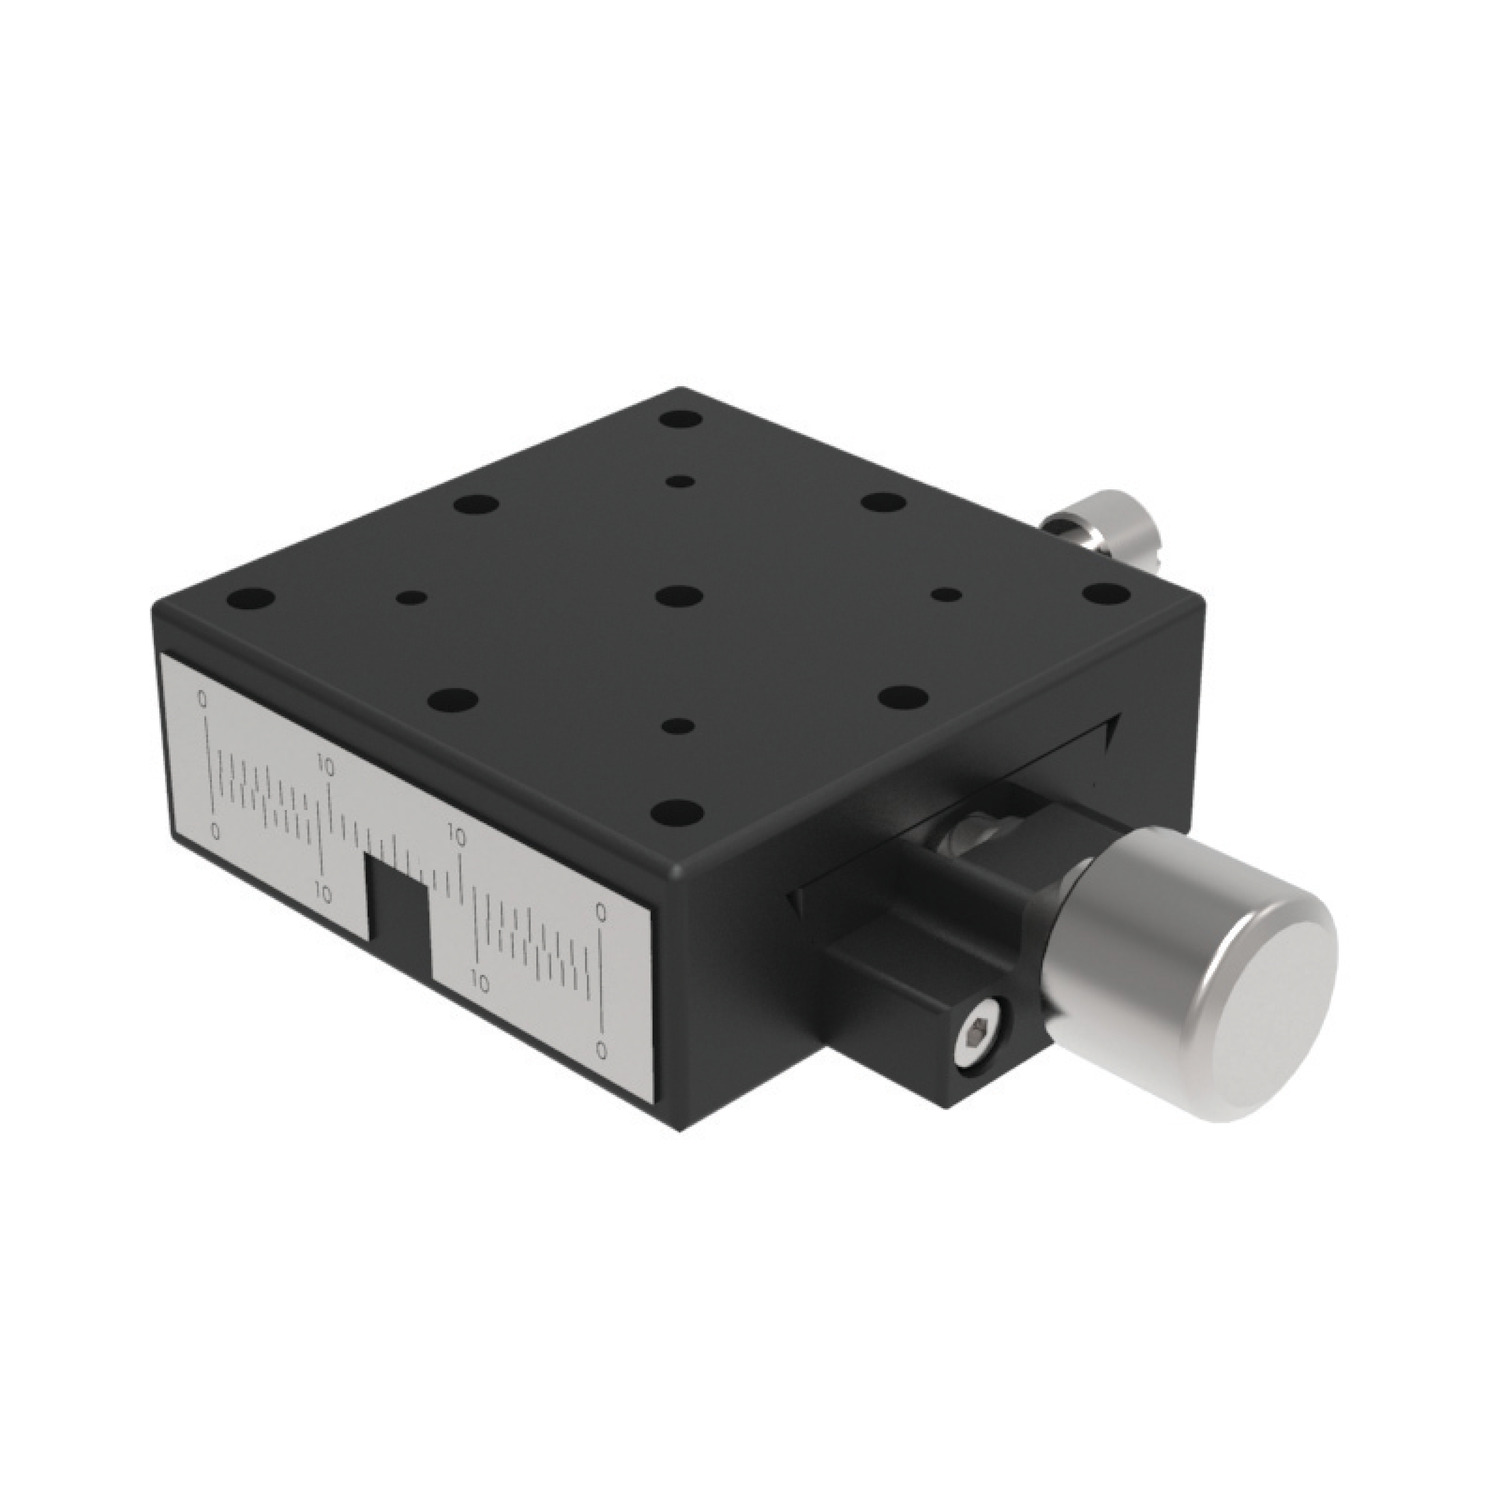 Miniature Dovetail Stages Miniature linear positioning stages including dovetail, rack and pinion, magnetic bases, tilt stages and laboratory jacks.